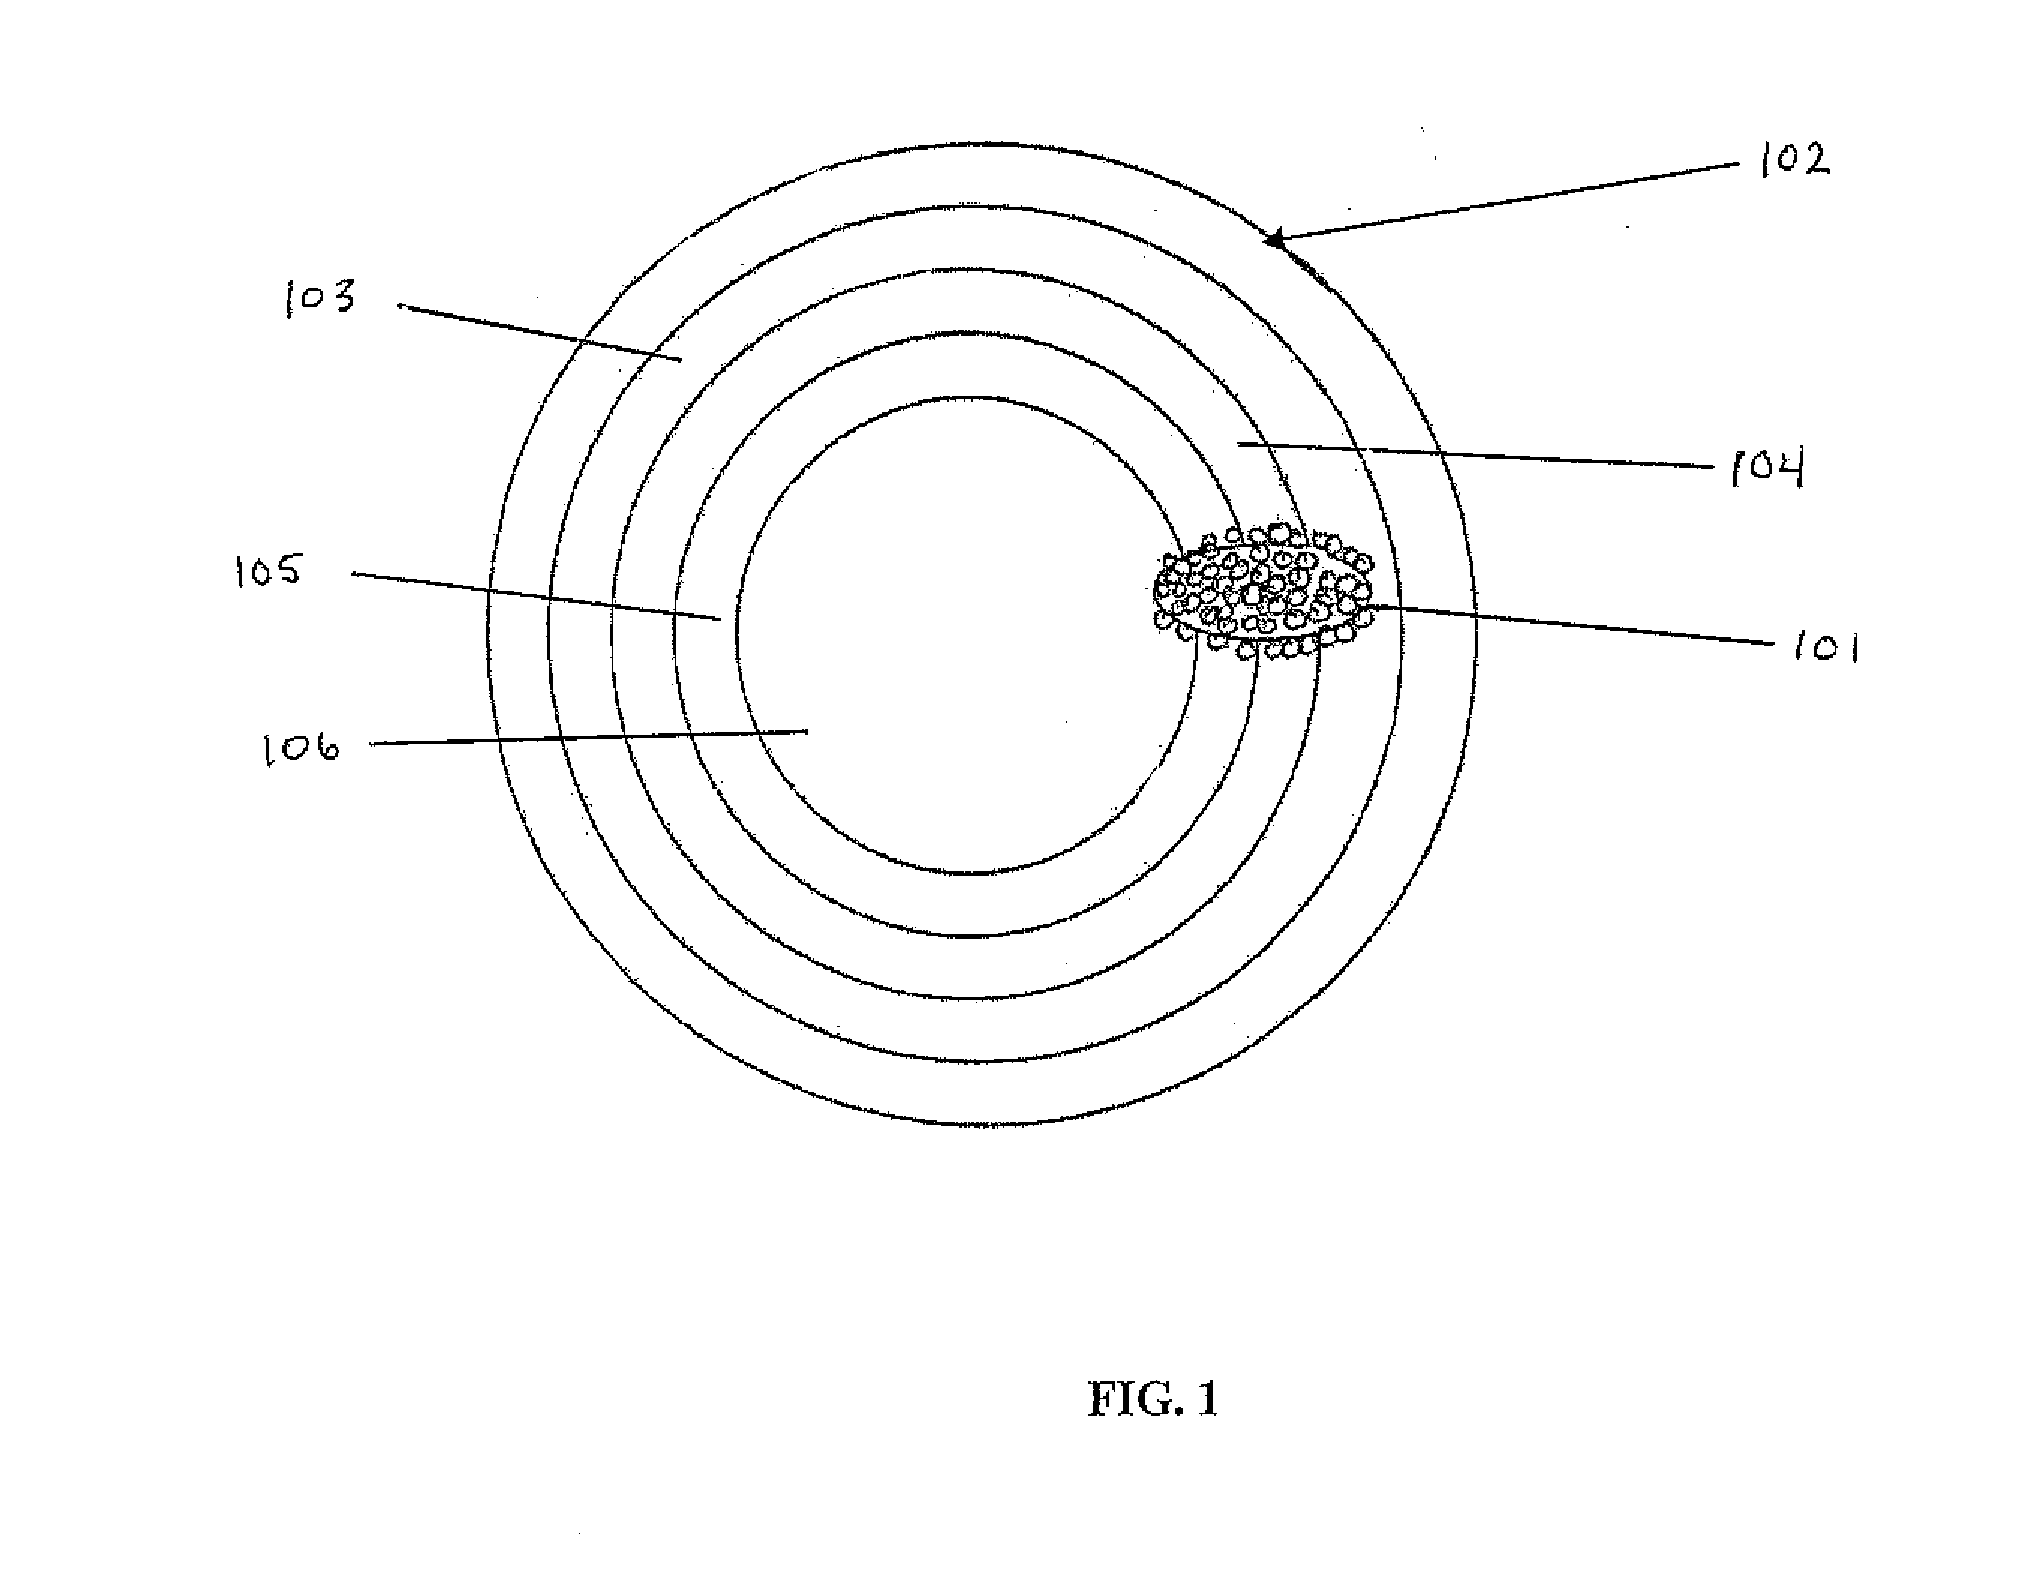 Composition and Method of Using Medicament for Treatment of Cancers and Tumors